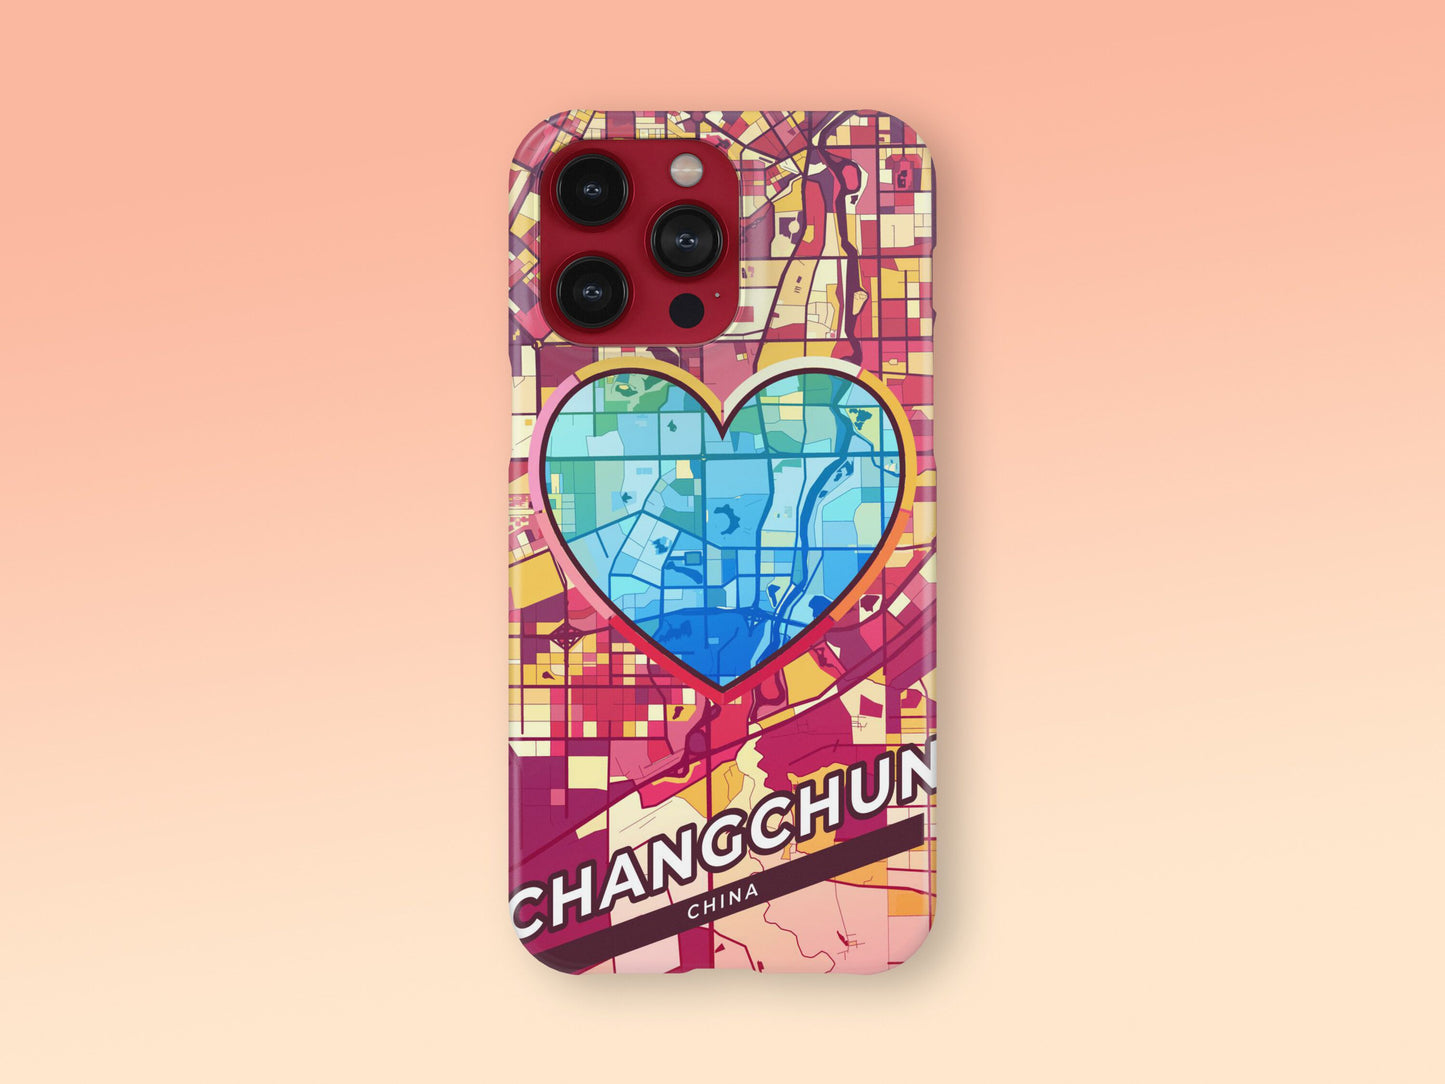 Changchun China slim phone case with colorful icon. Birthday, wedding or housewarming gift. Couple match cases. 2